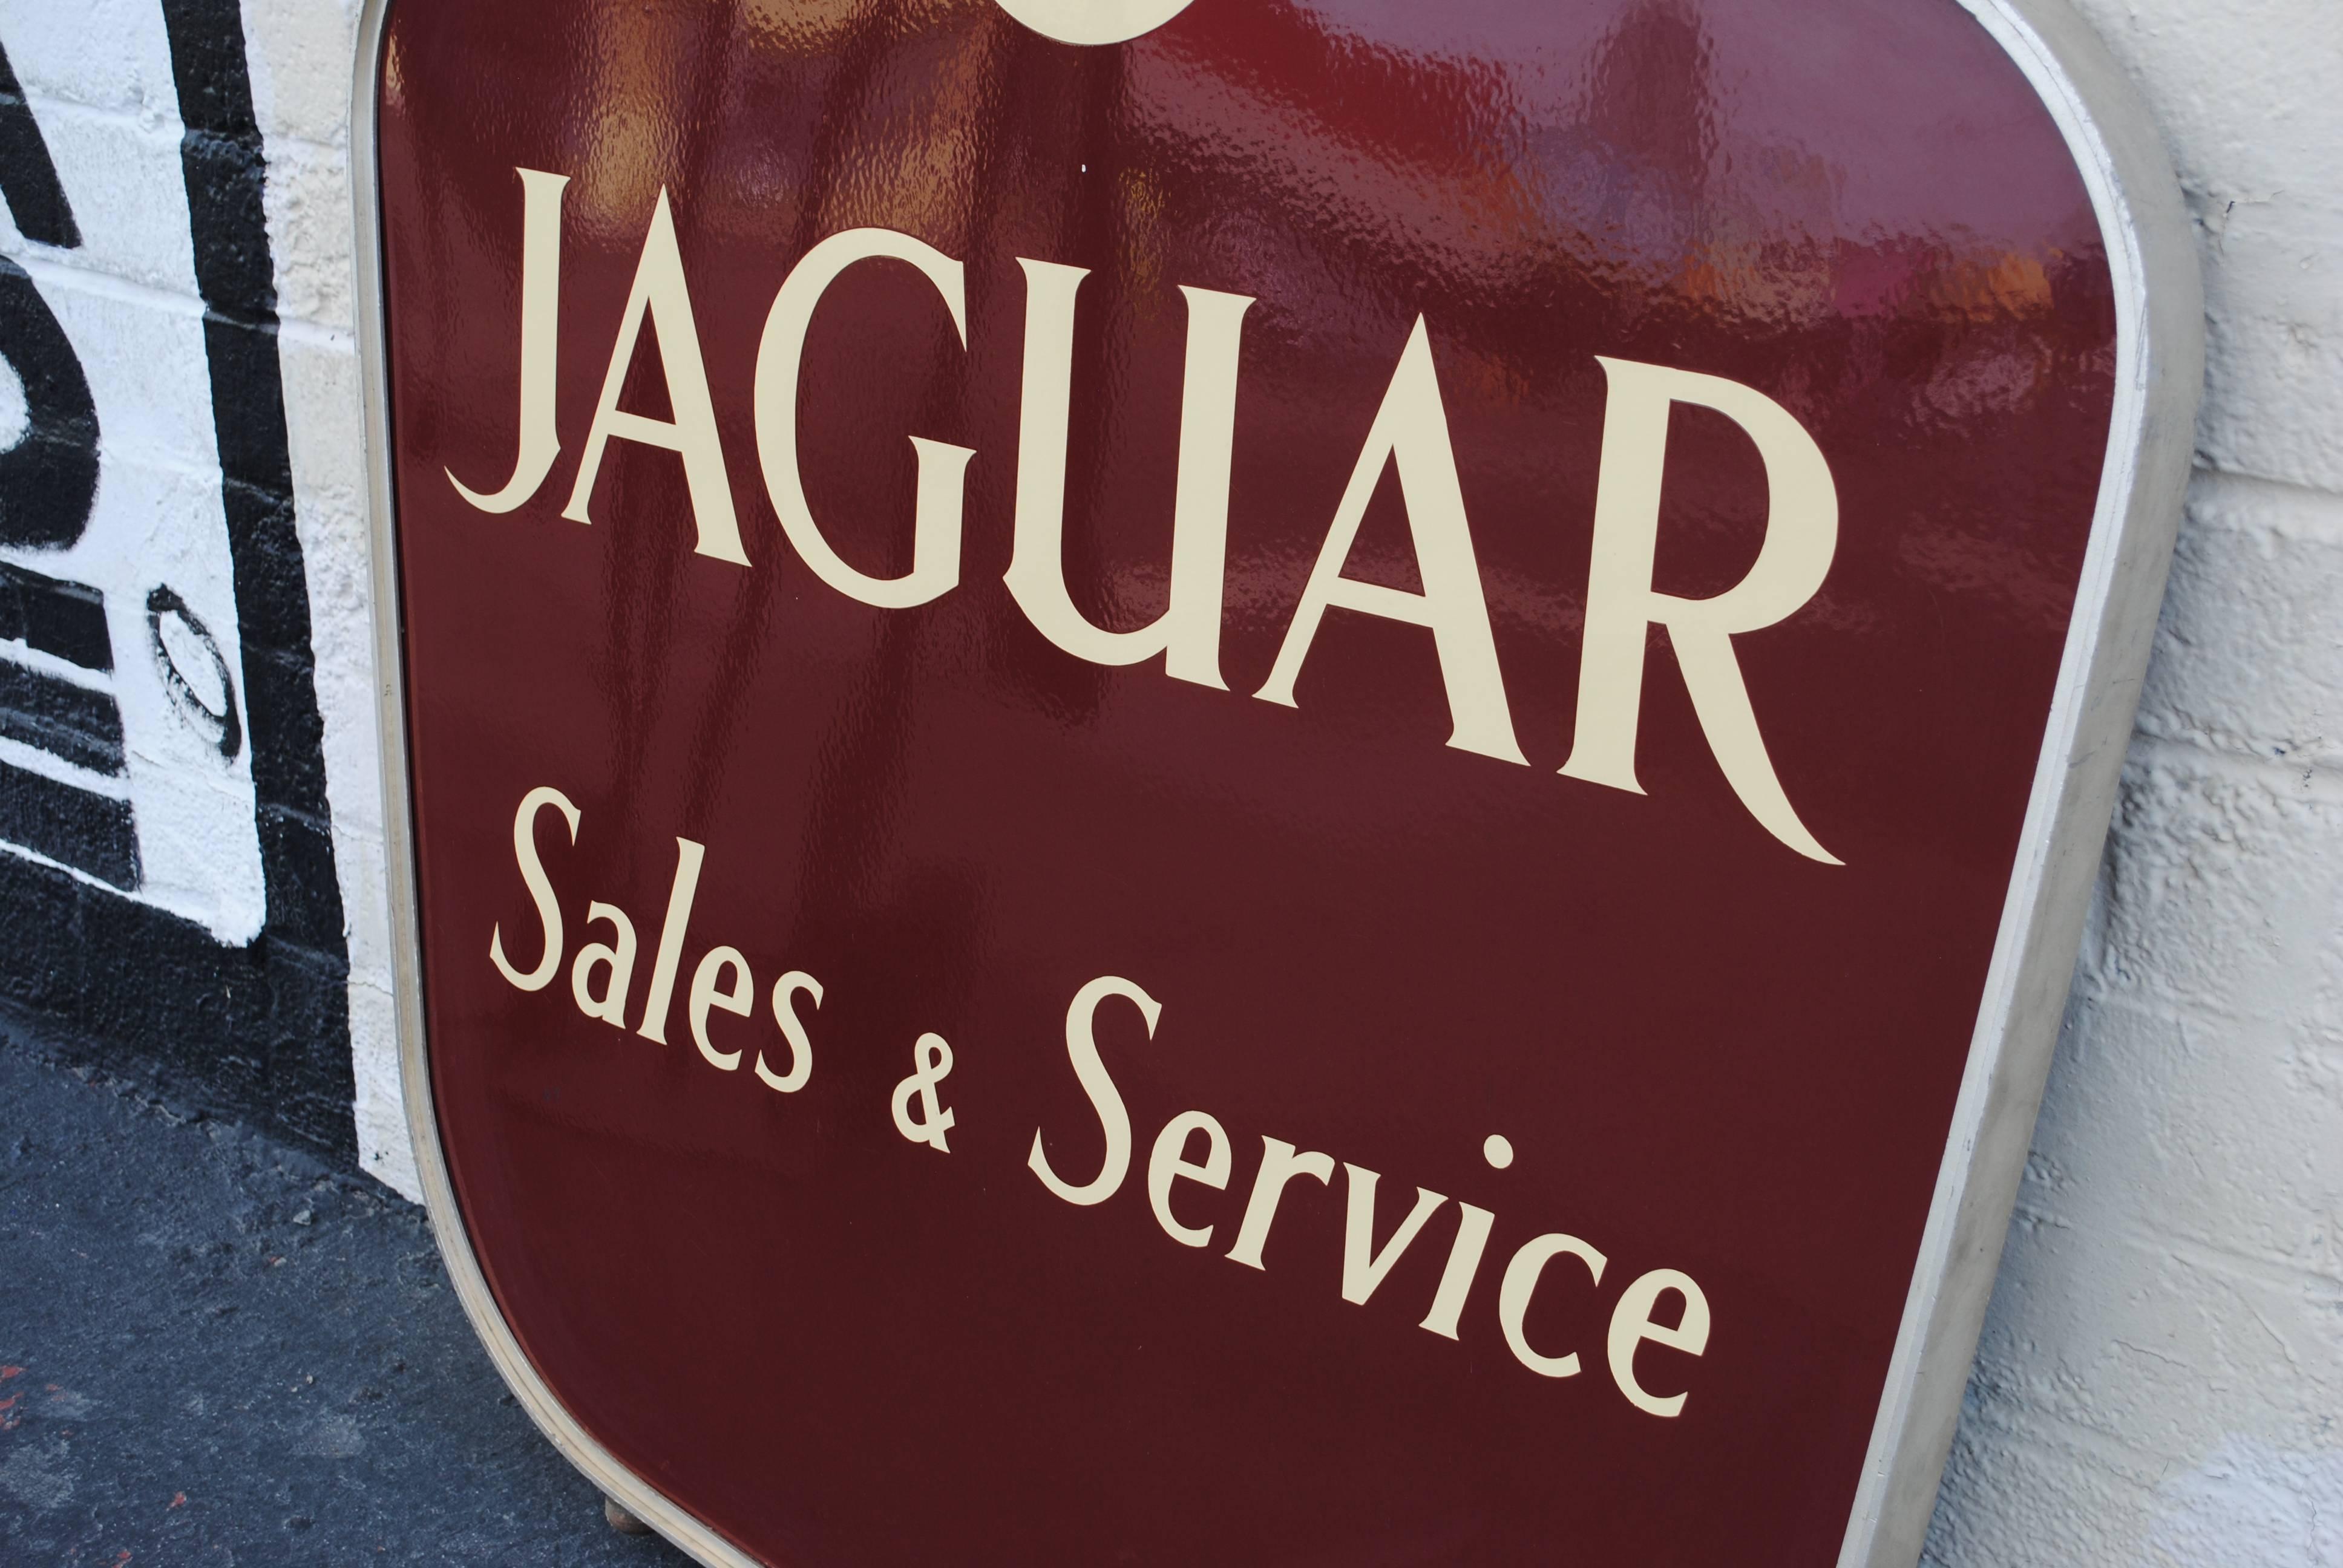 Jaguar sales and service double-sided porcelain dealership sign. Complete with top hangers and 2